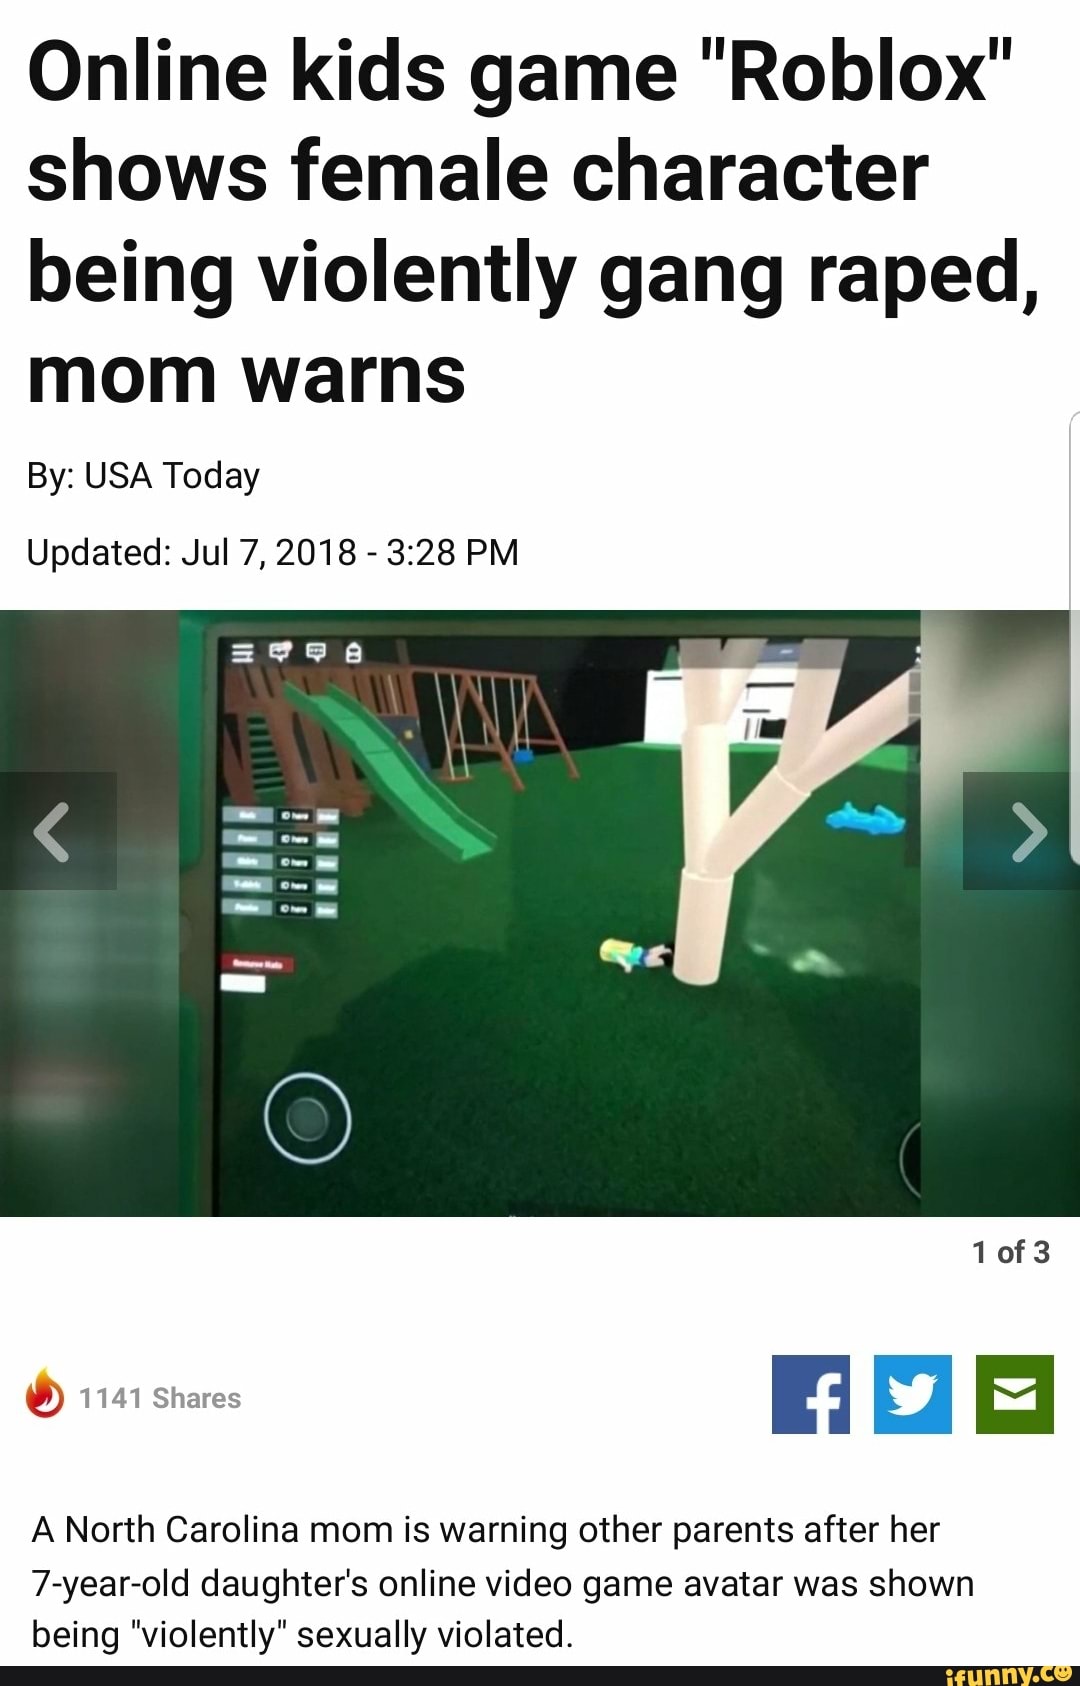 Online Kids Game Roblox Shows Female Character Being Violently Gang Raped Mom Warns By Usa Today Updated Jul 7 2018 3 28 Pm A North Carolina Mom Is Warning Other Parents After - roblox kids game shows character being sexually violated mom warns